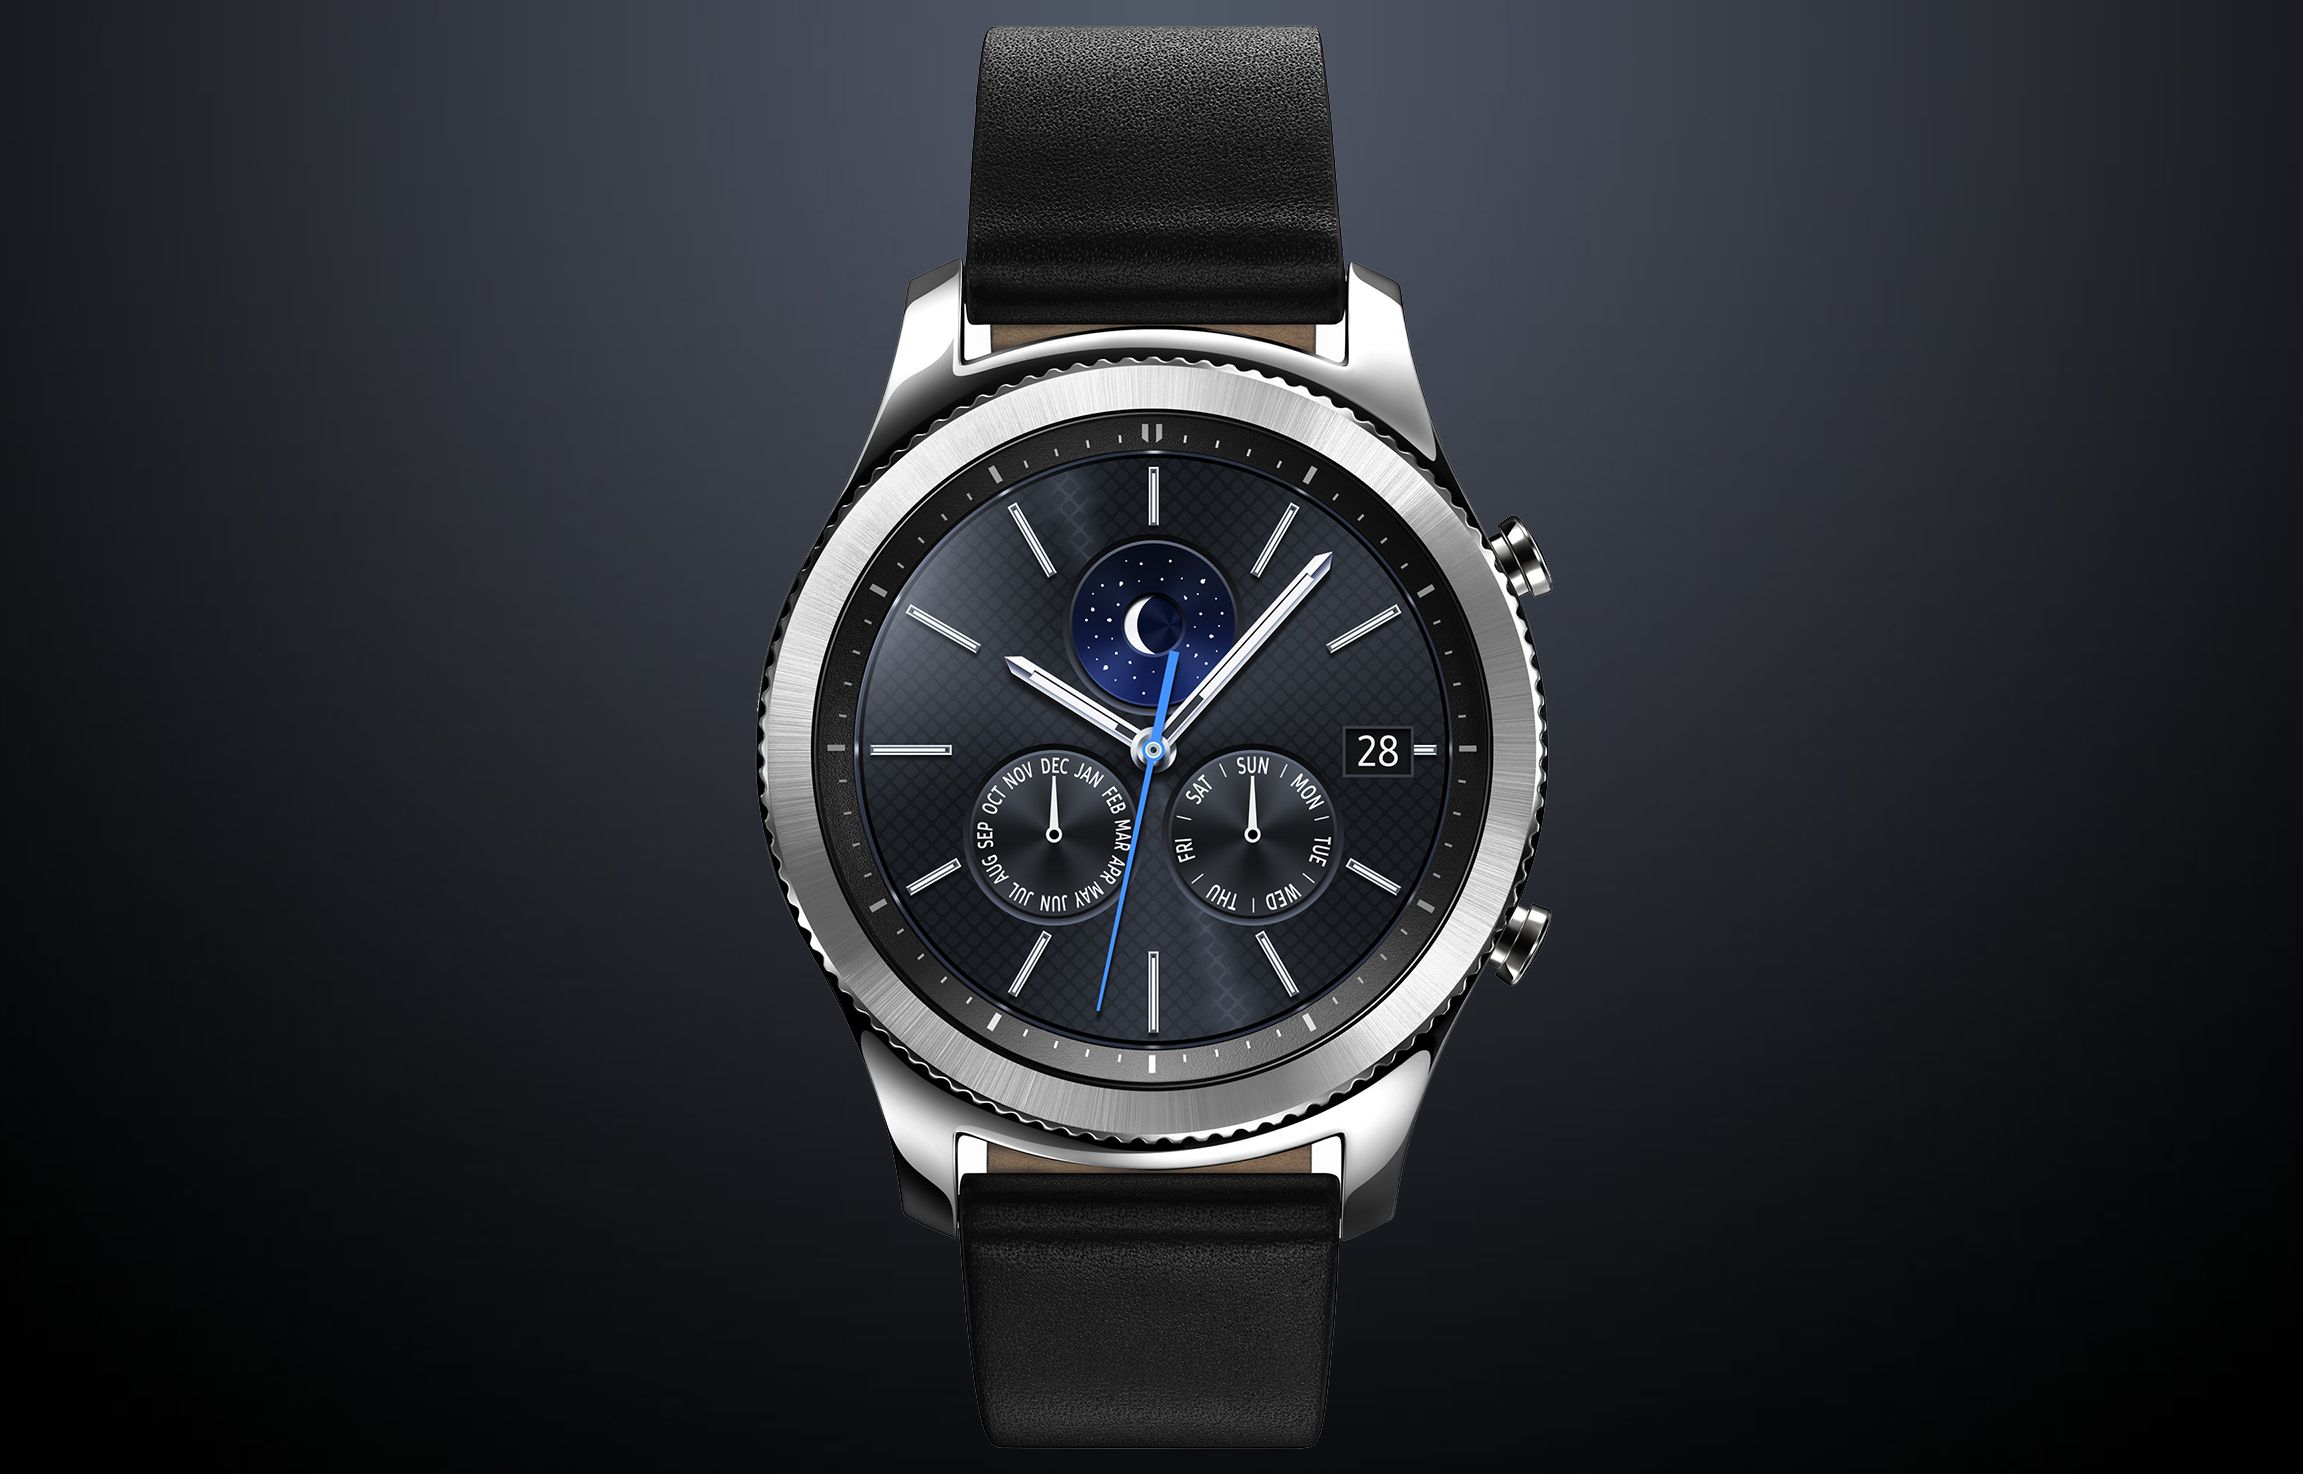 samsung quietly announces gear s3 classic watch with lte connectivity image 1